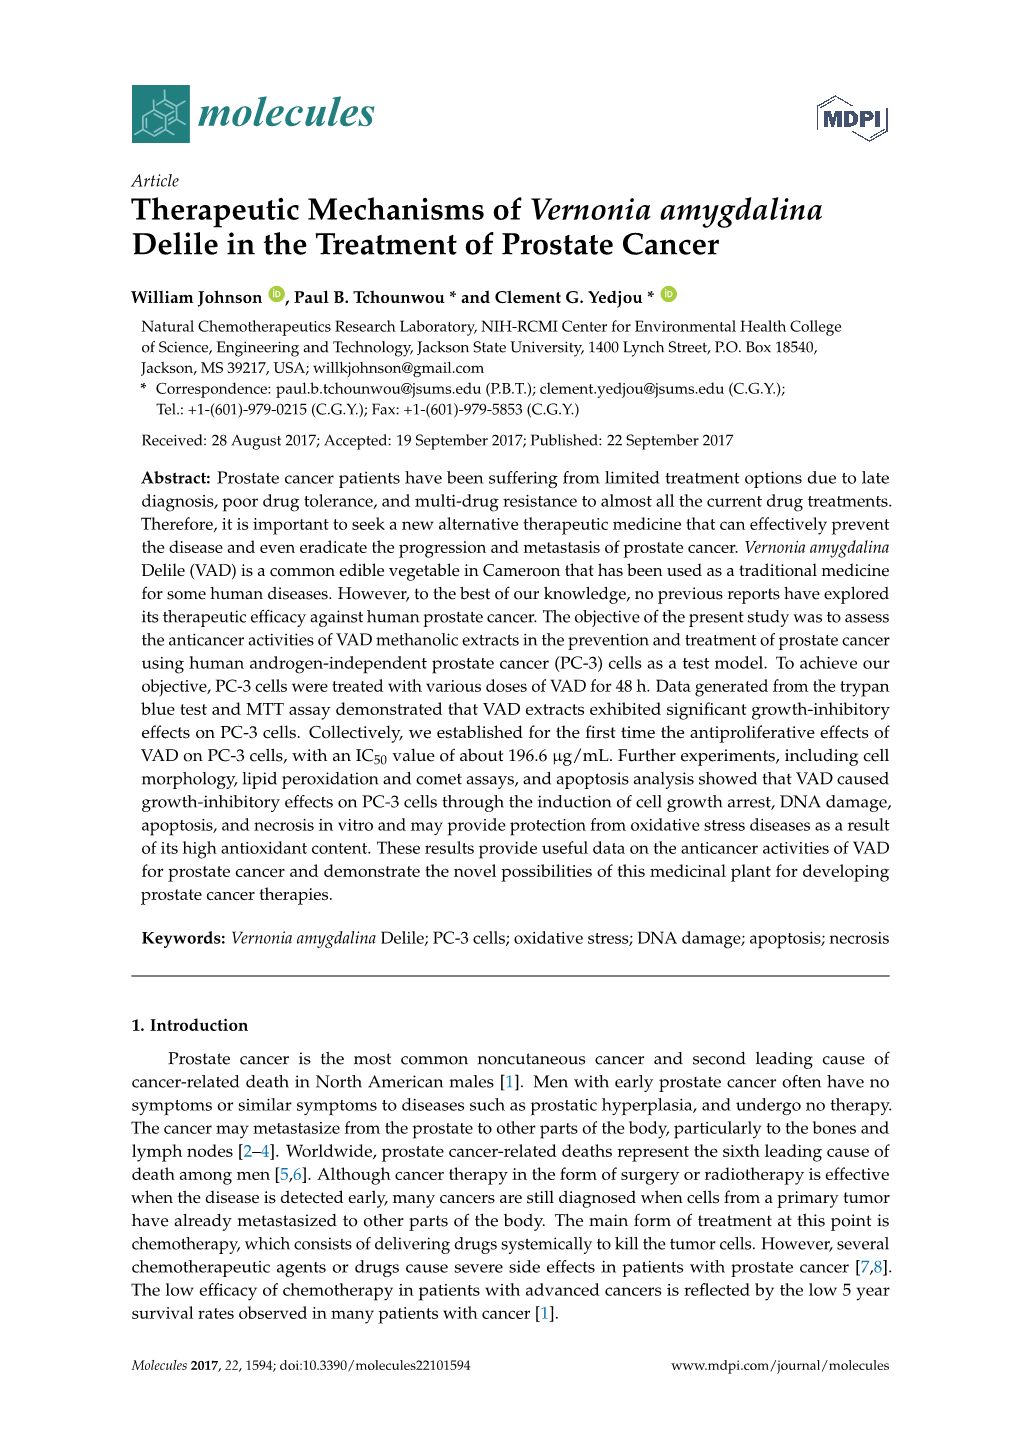 Therapeutic Mechanisms of Vernonia Amygdalina Delile in the Treatment of Prostate Cancer